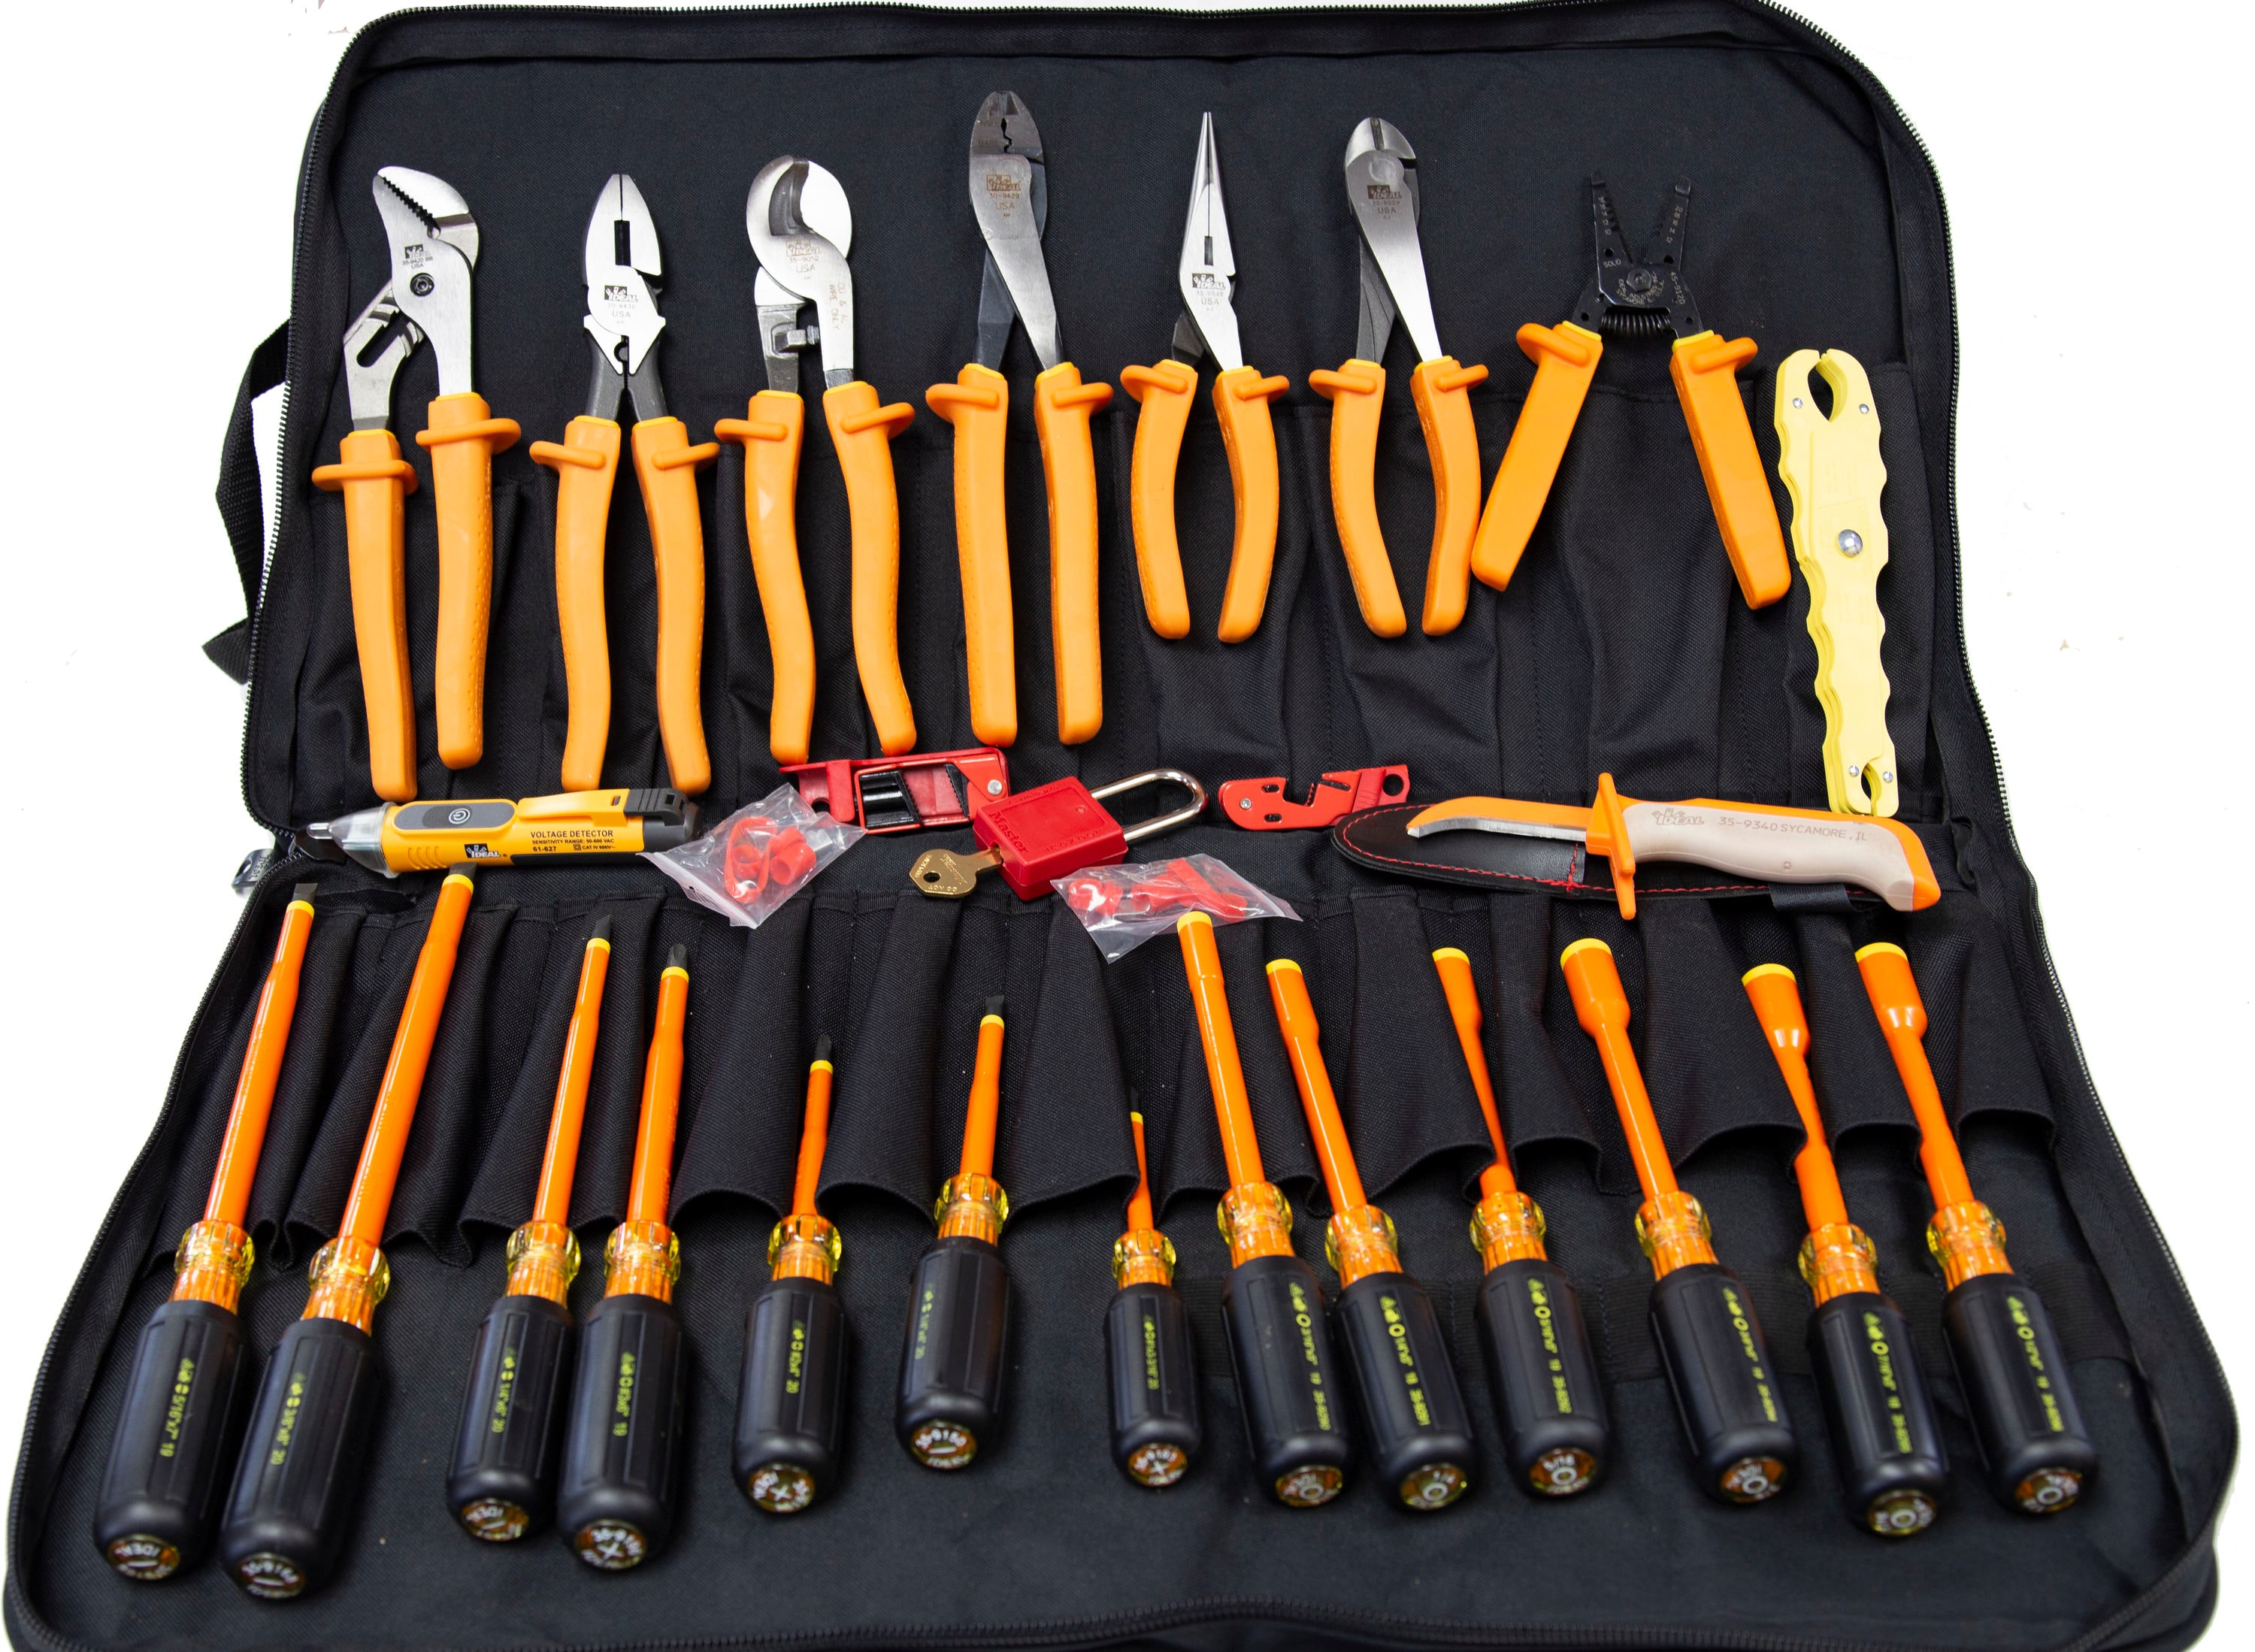 The Complete Guide to Insulated Electrical Tool Sets